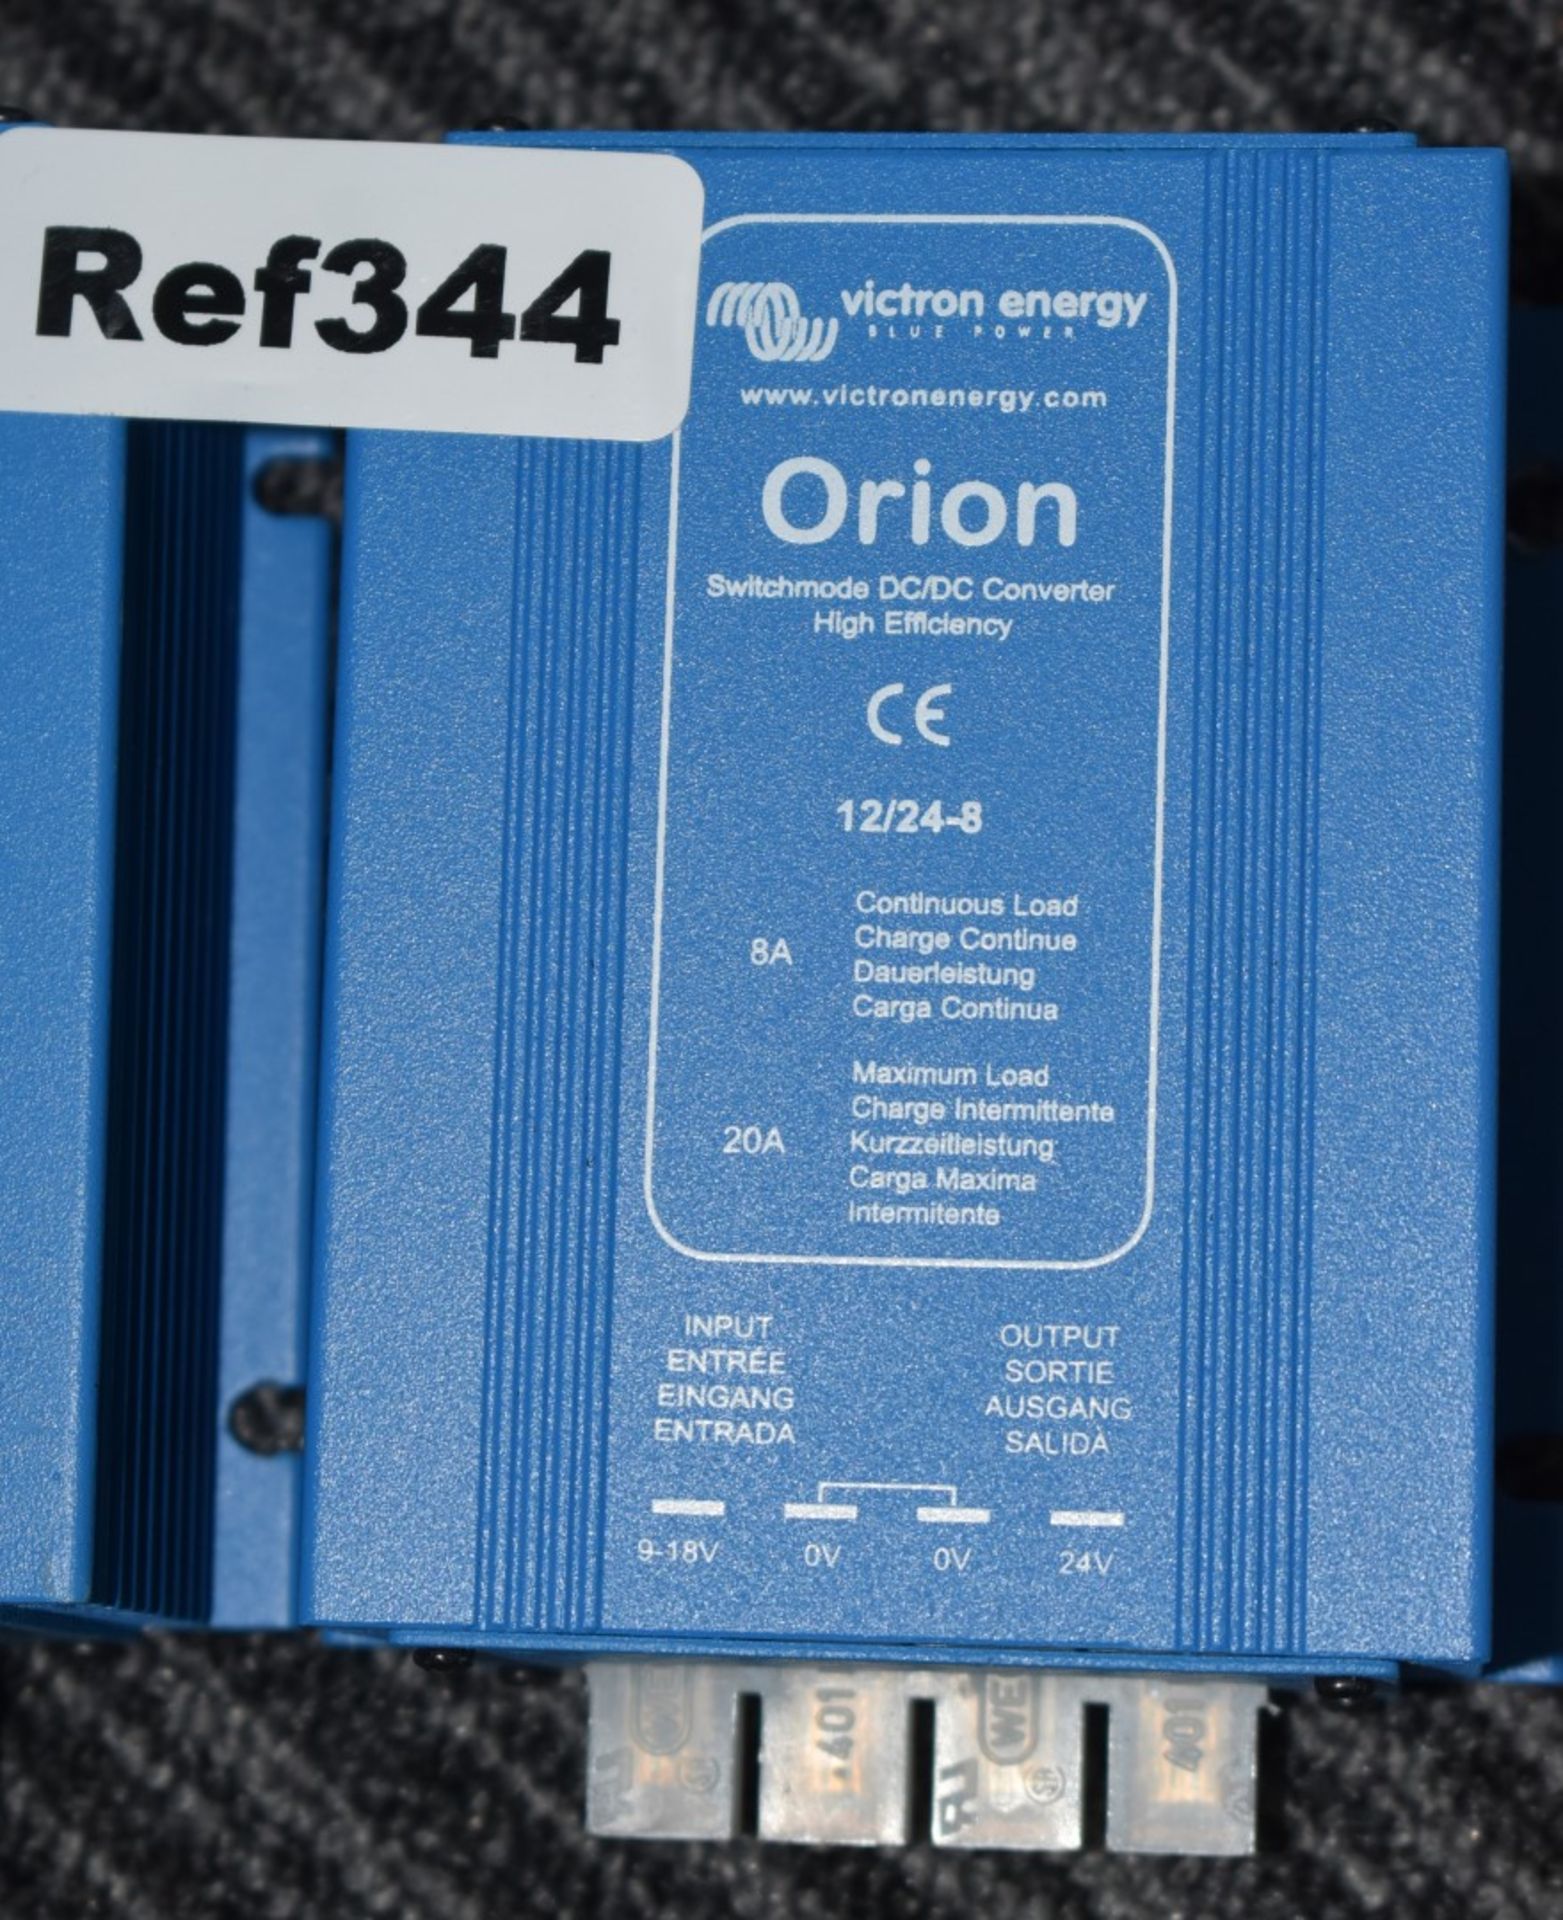 2 x Victron Energy Orion Switchmode DC/DC High Efficiency Condverters 12/24-8 - Model ORI122408020 - - Image 3 of 5